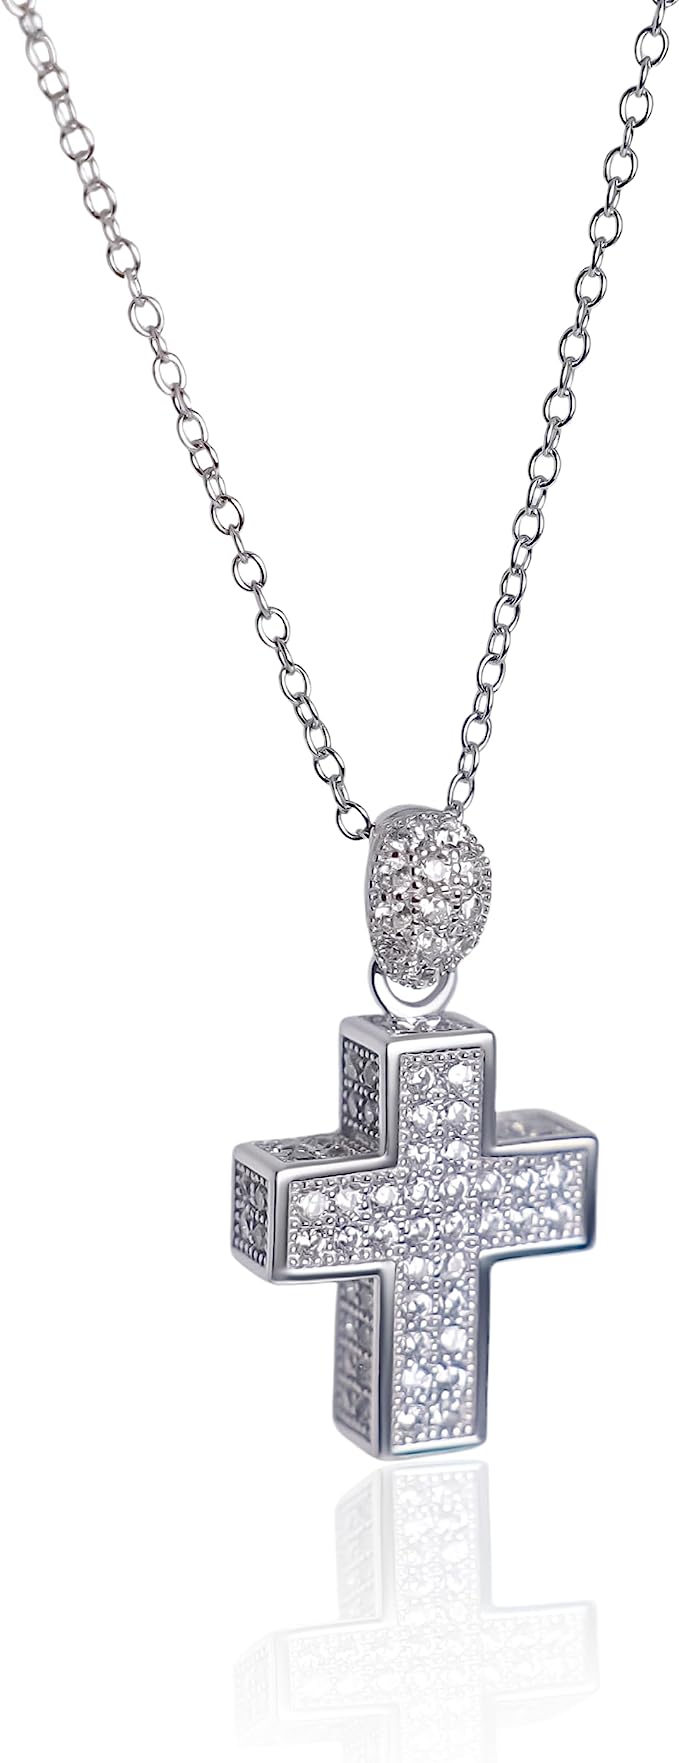 Silver Plated Thick Sterling Silver Cross Pendant Necklace Zirconia Stones Nazareth Store